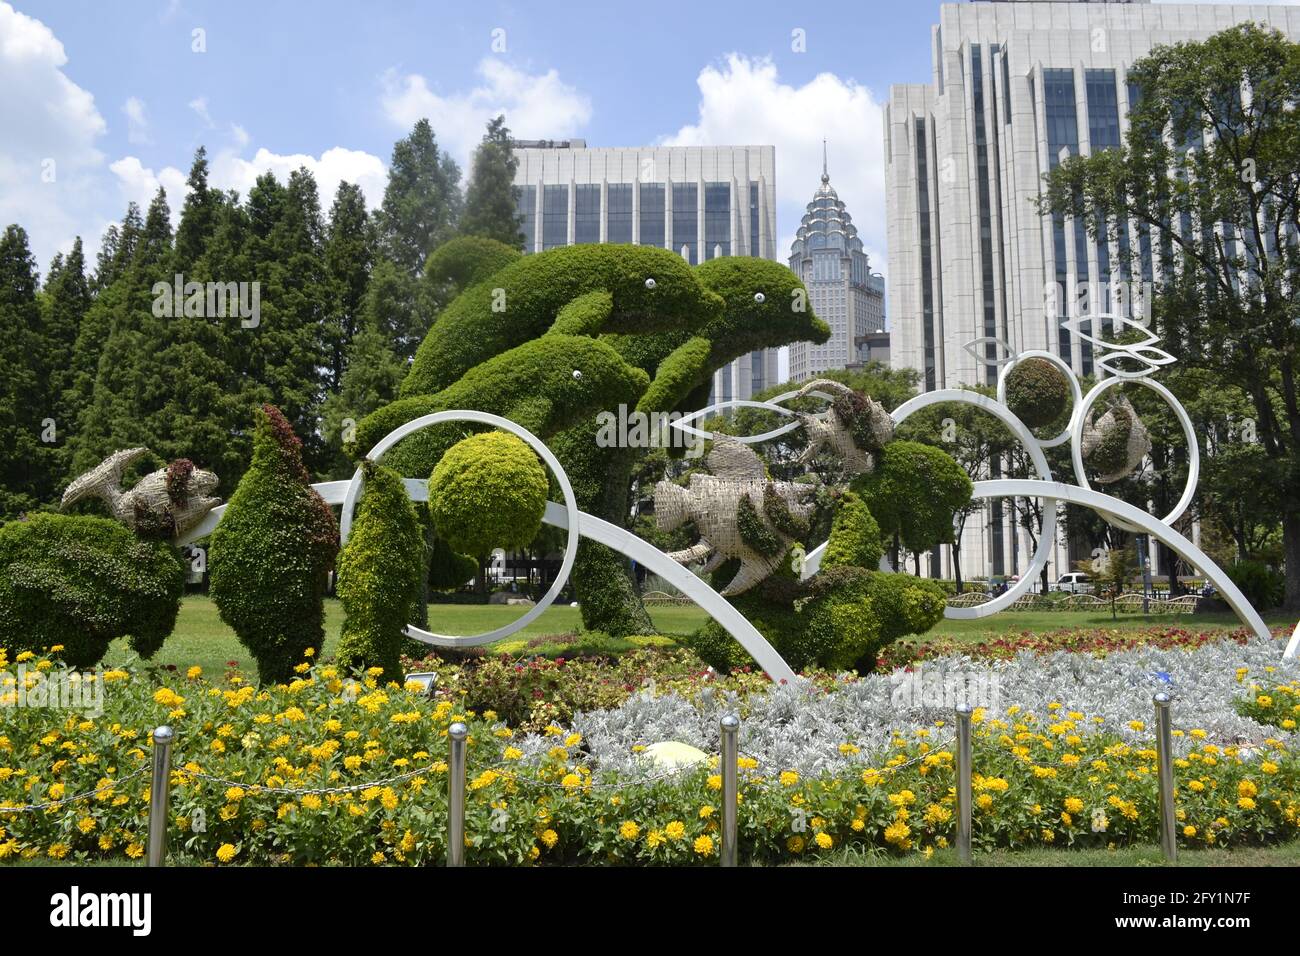 Dolphin shaped hedges along with small well trimmed shrubs in a beautiful and peaceful park in the city of Tianjin, China Stock Photo